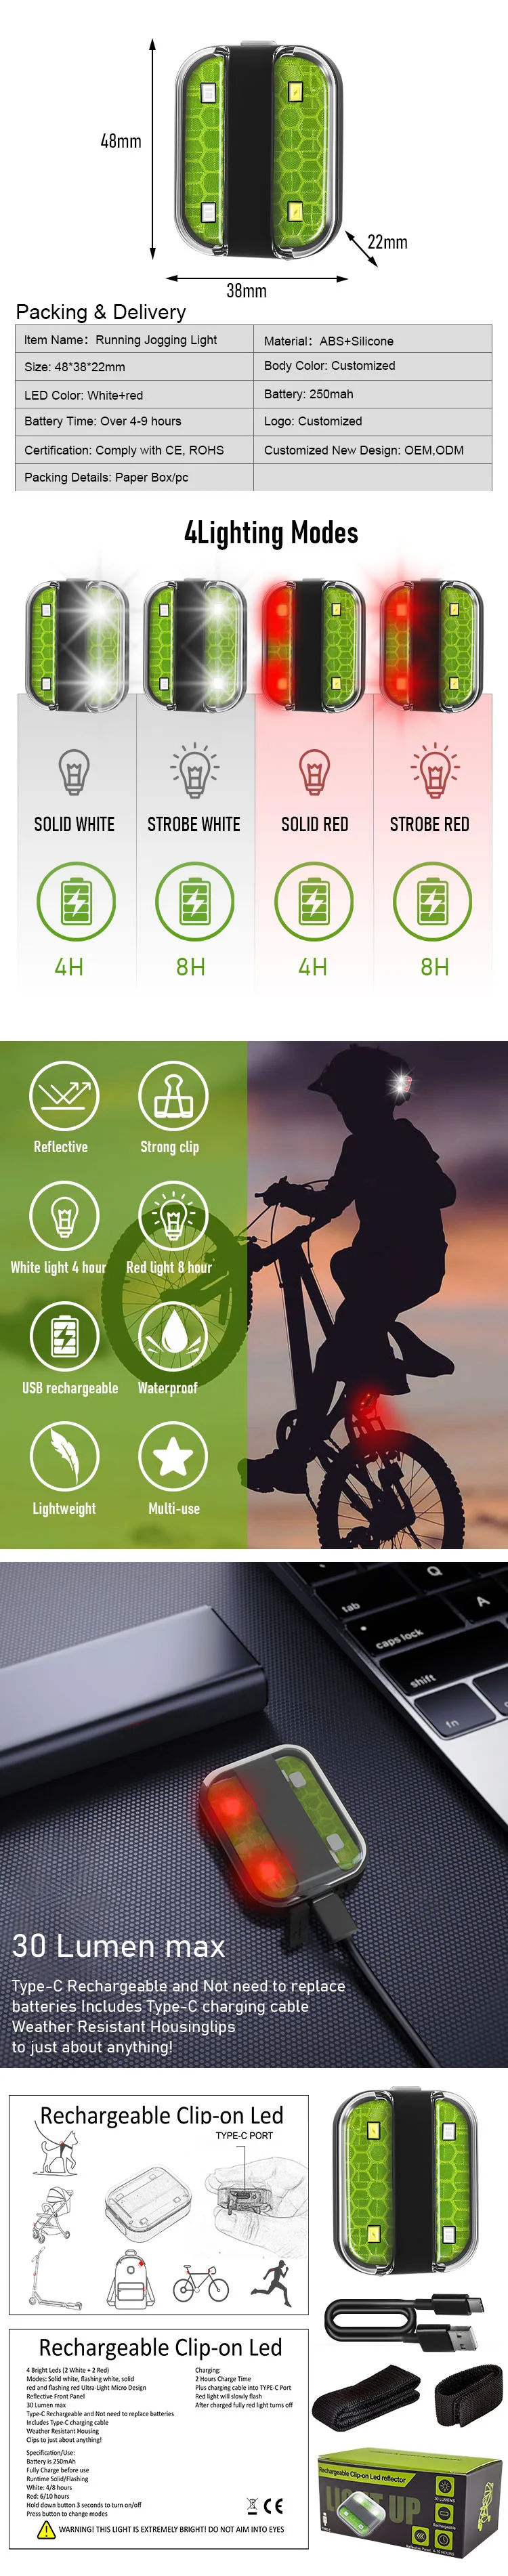 LINLI USB Rechargeable Flashing Safety Cilp On Reflective Light 4 Lighting  Mode Strobe Lights For Night Walking Cycling Jogging - Buy LINLI USB  Rechargeable Flashing Safety Cilp On Reflective Light 4 Lighting